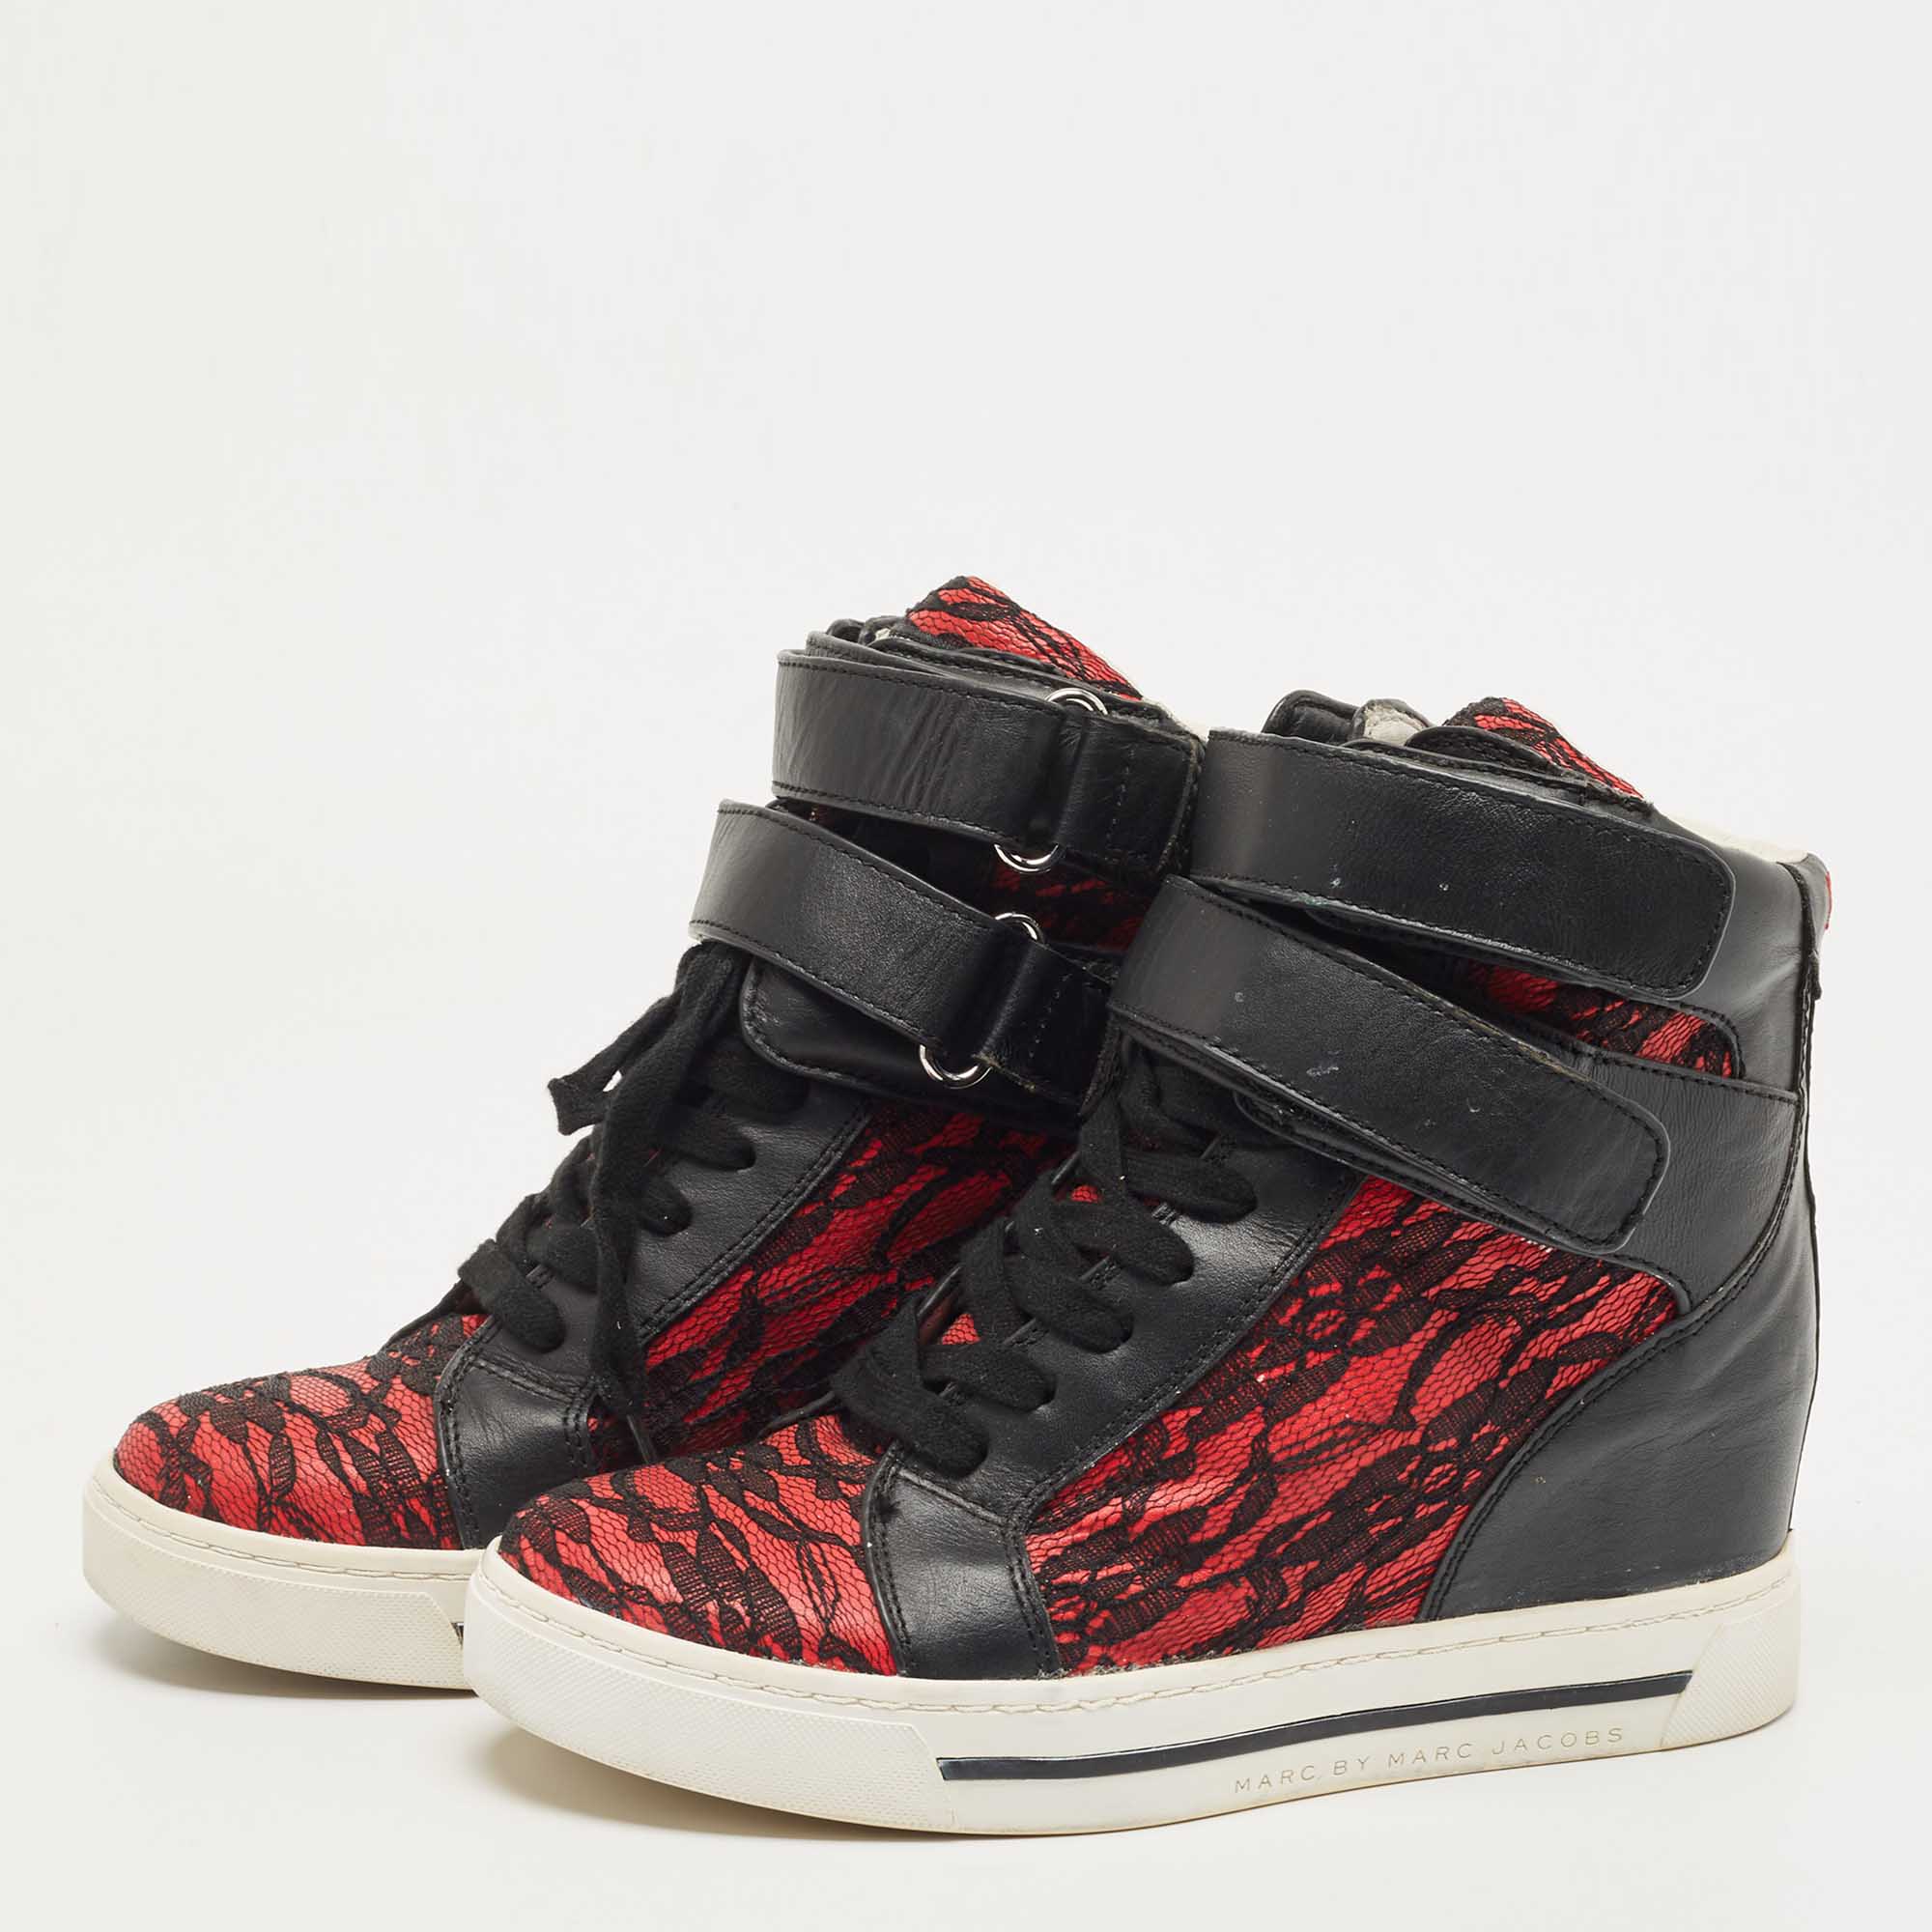 

Marc by Marc Jacobs Black/Red Leather and Lace Detail Sneakers Size